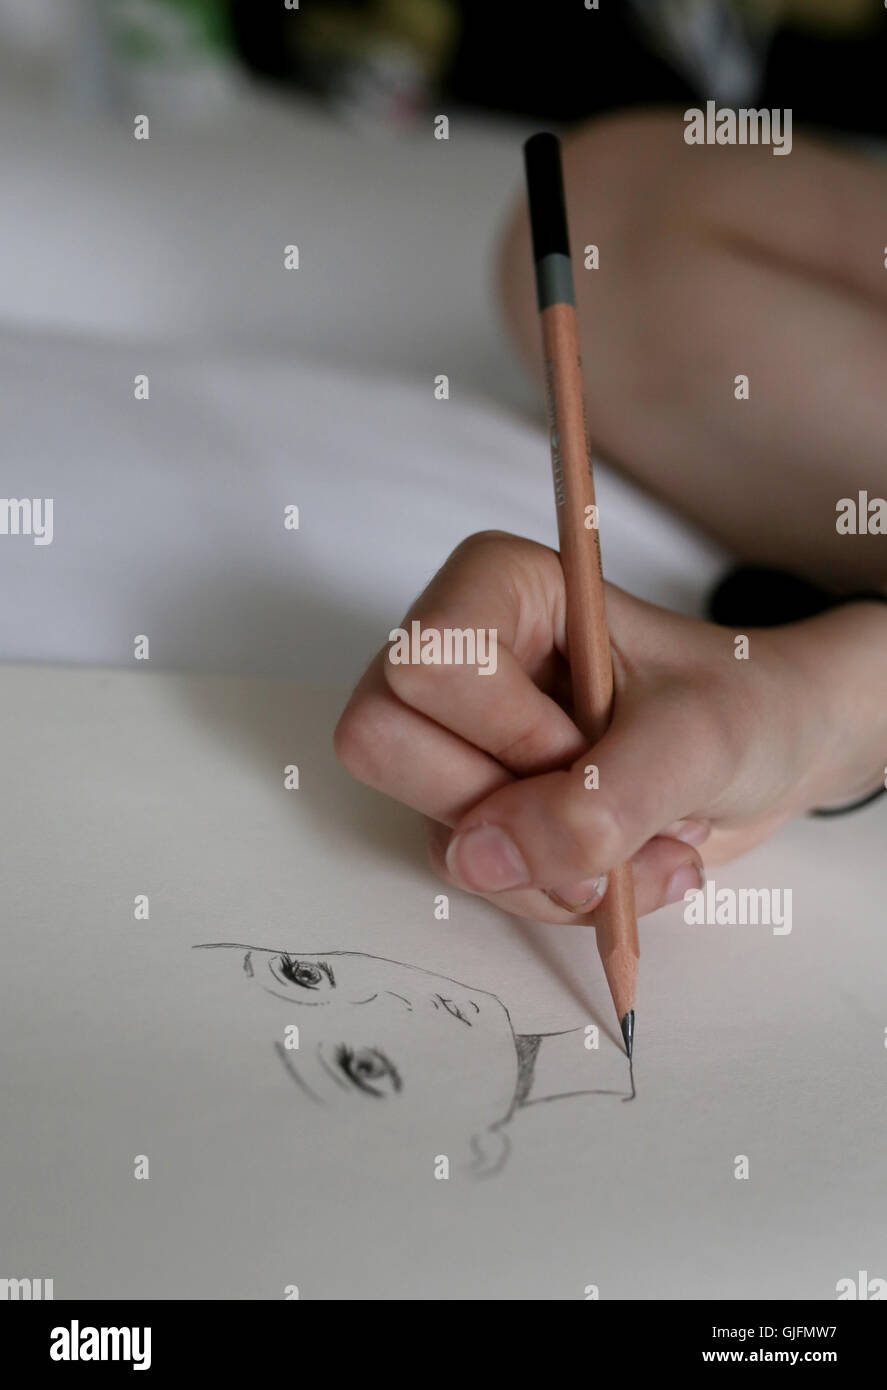 A girls hand holding a pencil and drawing a face, Manga style on white paper. Stock Photo